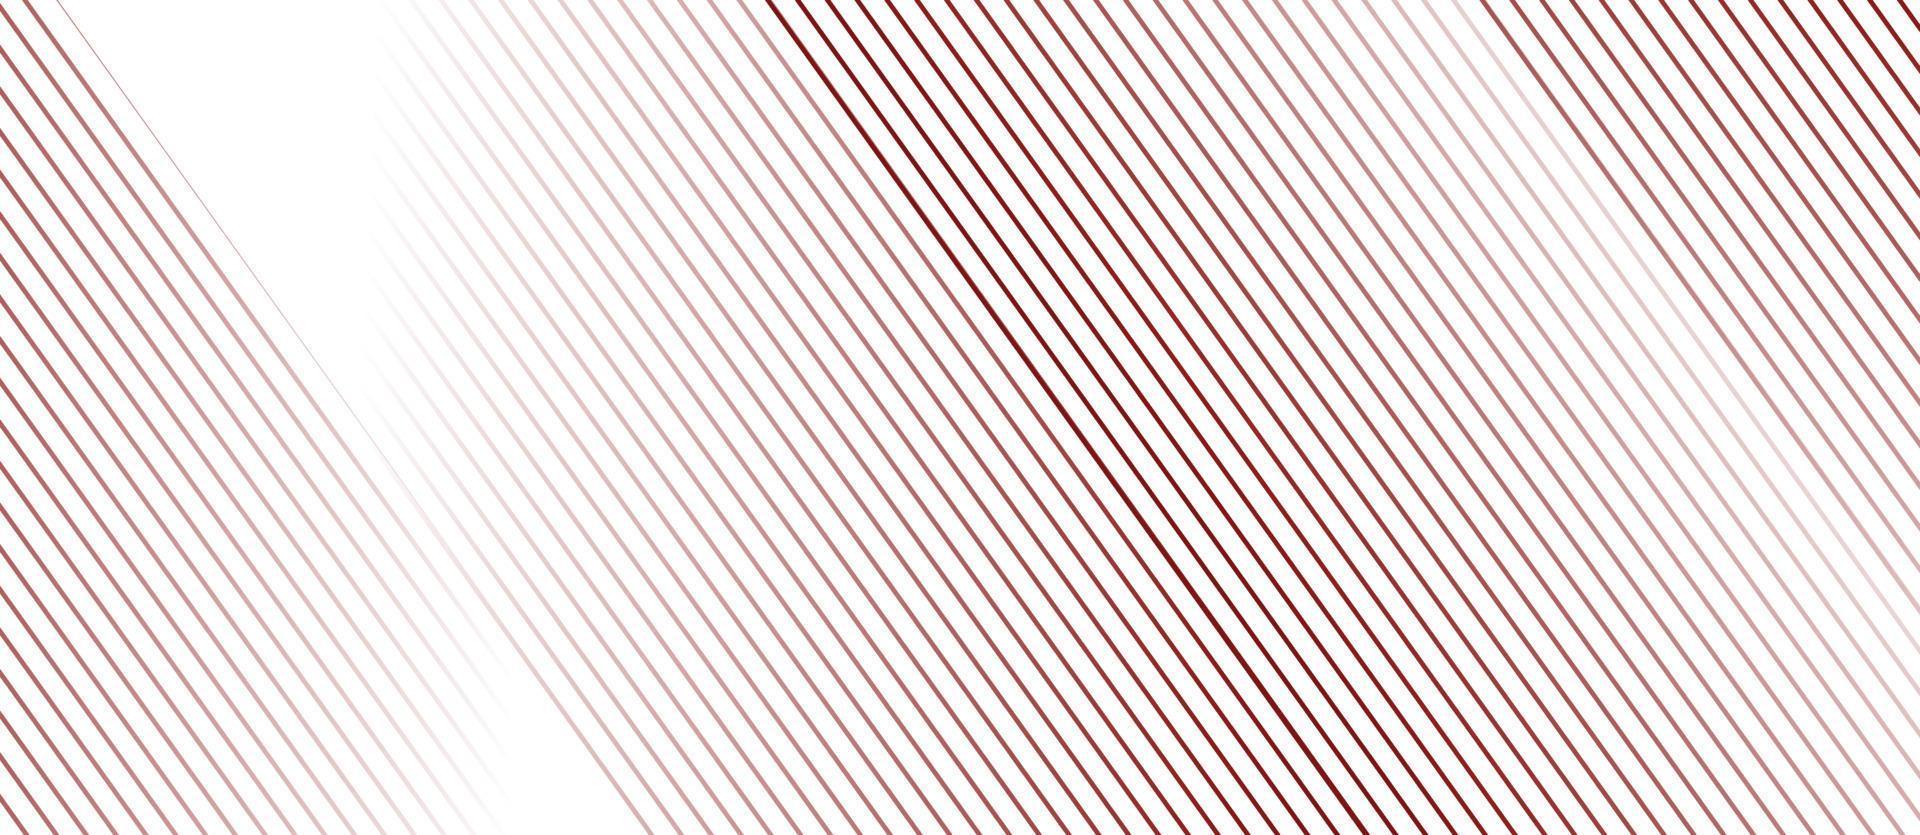 line abstract pattern background. line composition simple minimalistic design. striped background with stripes design. background lines wave design. White gradient diagonal stripe line background vector